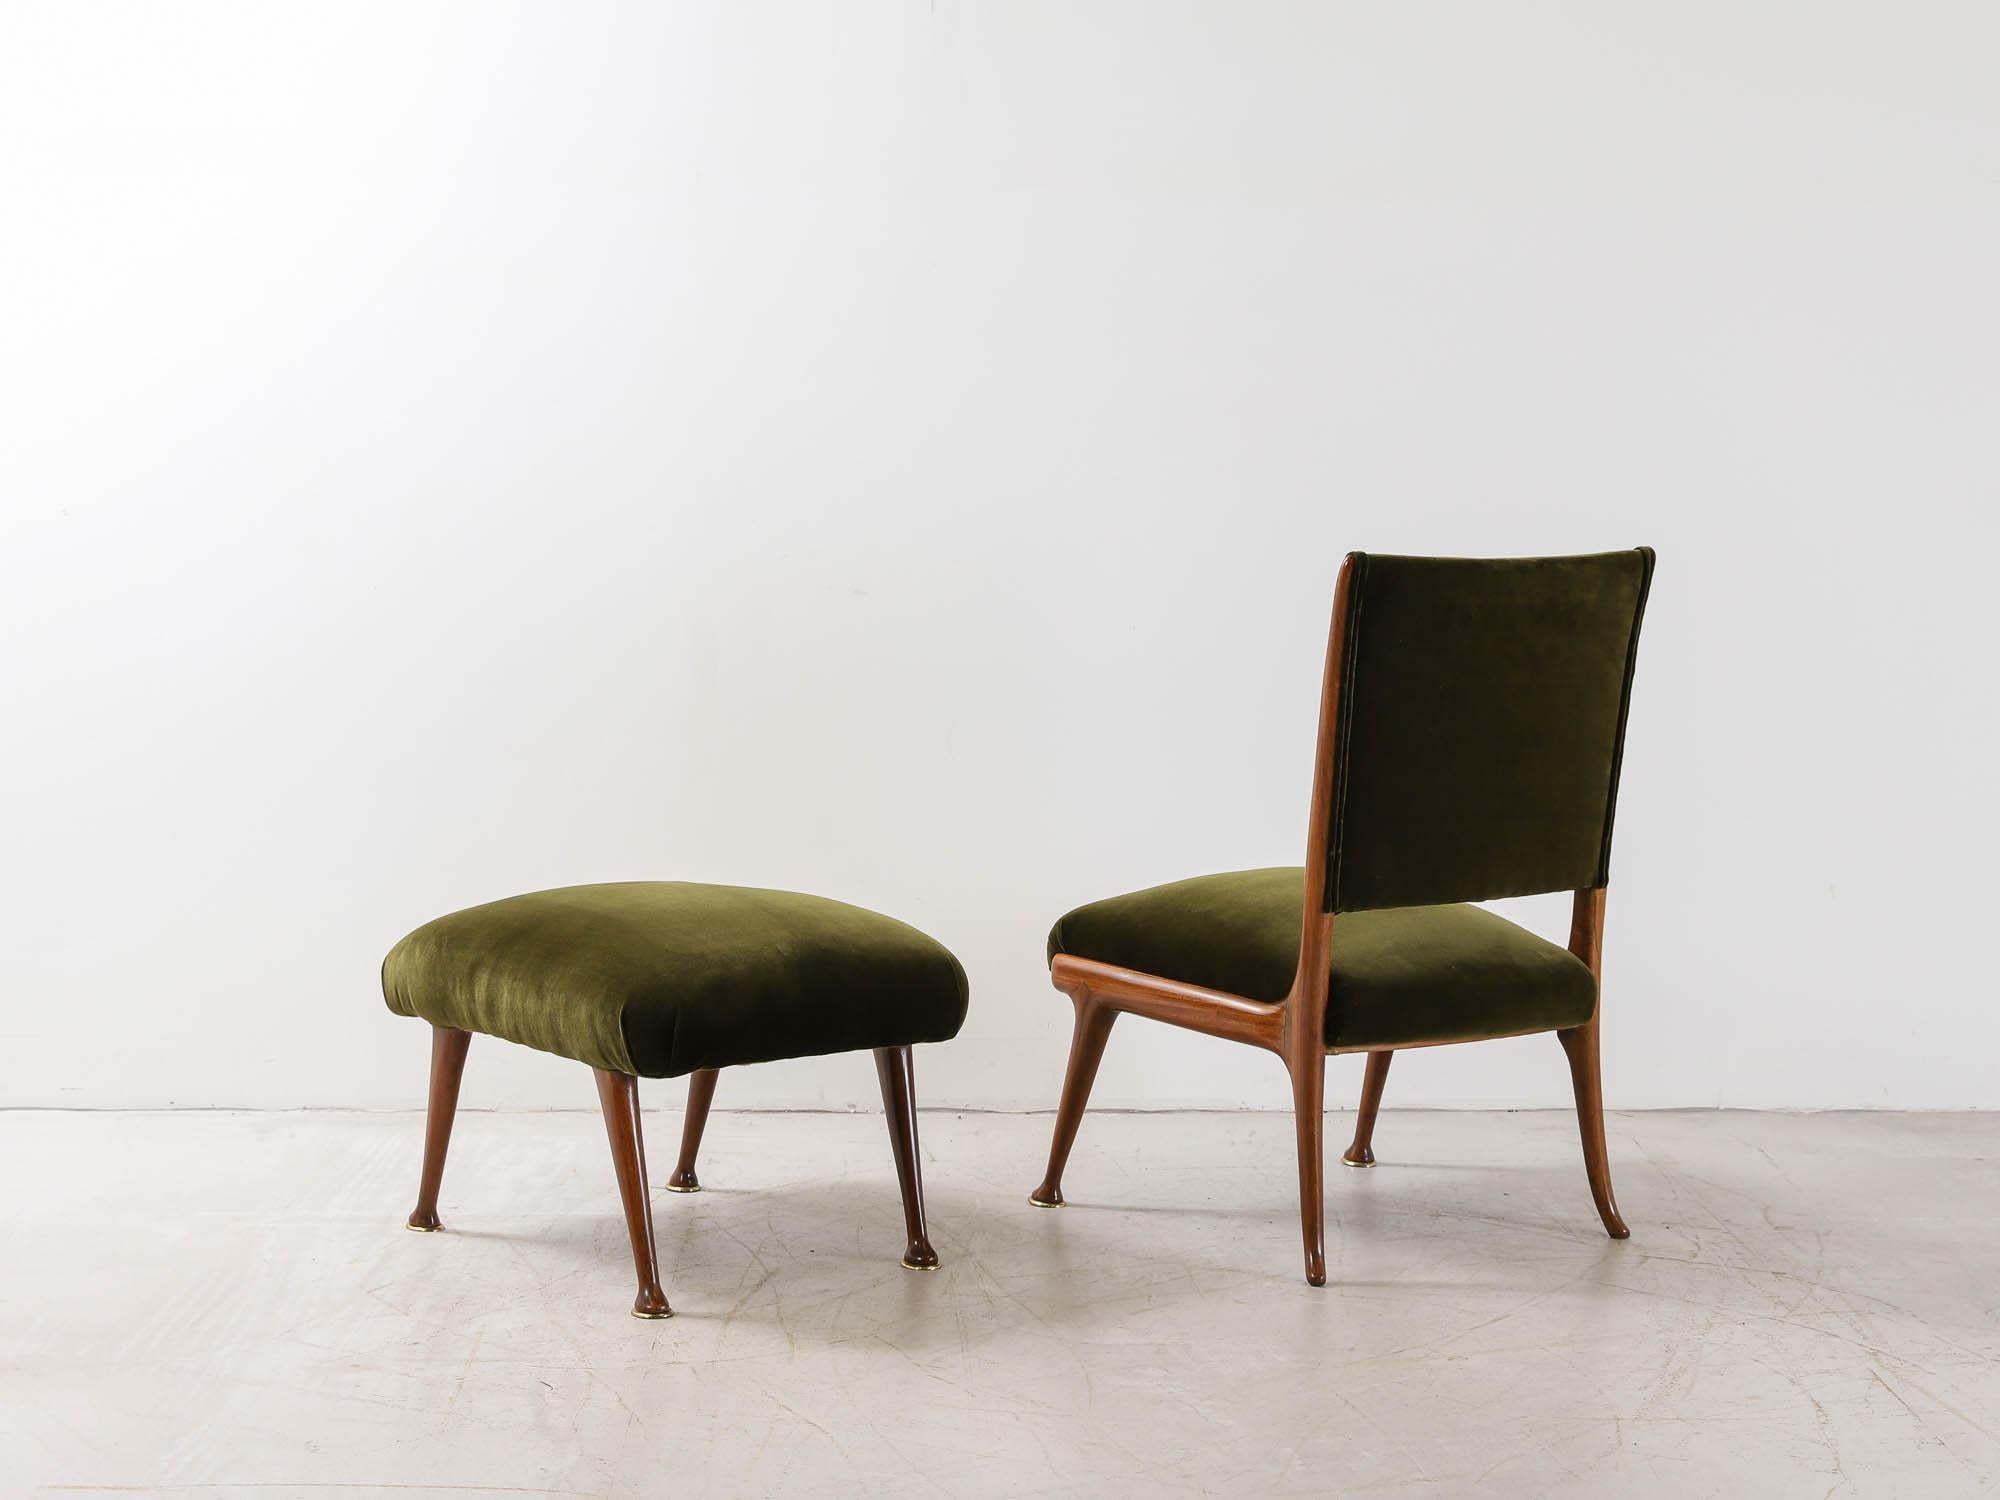 An Italian 1960s armchair and ottoman with walnut frames and brass details to the feet, upholstered in a moss green velvet.

CHAIR: D55 x W49.5 x H80 x SH37 cm

OTTOMAN: L60 x W45 x H40 cm